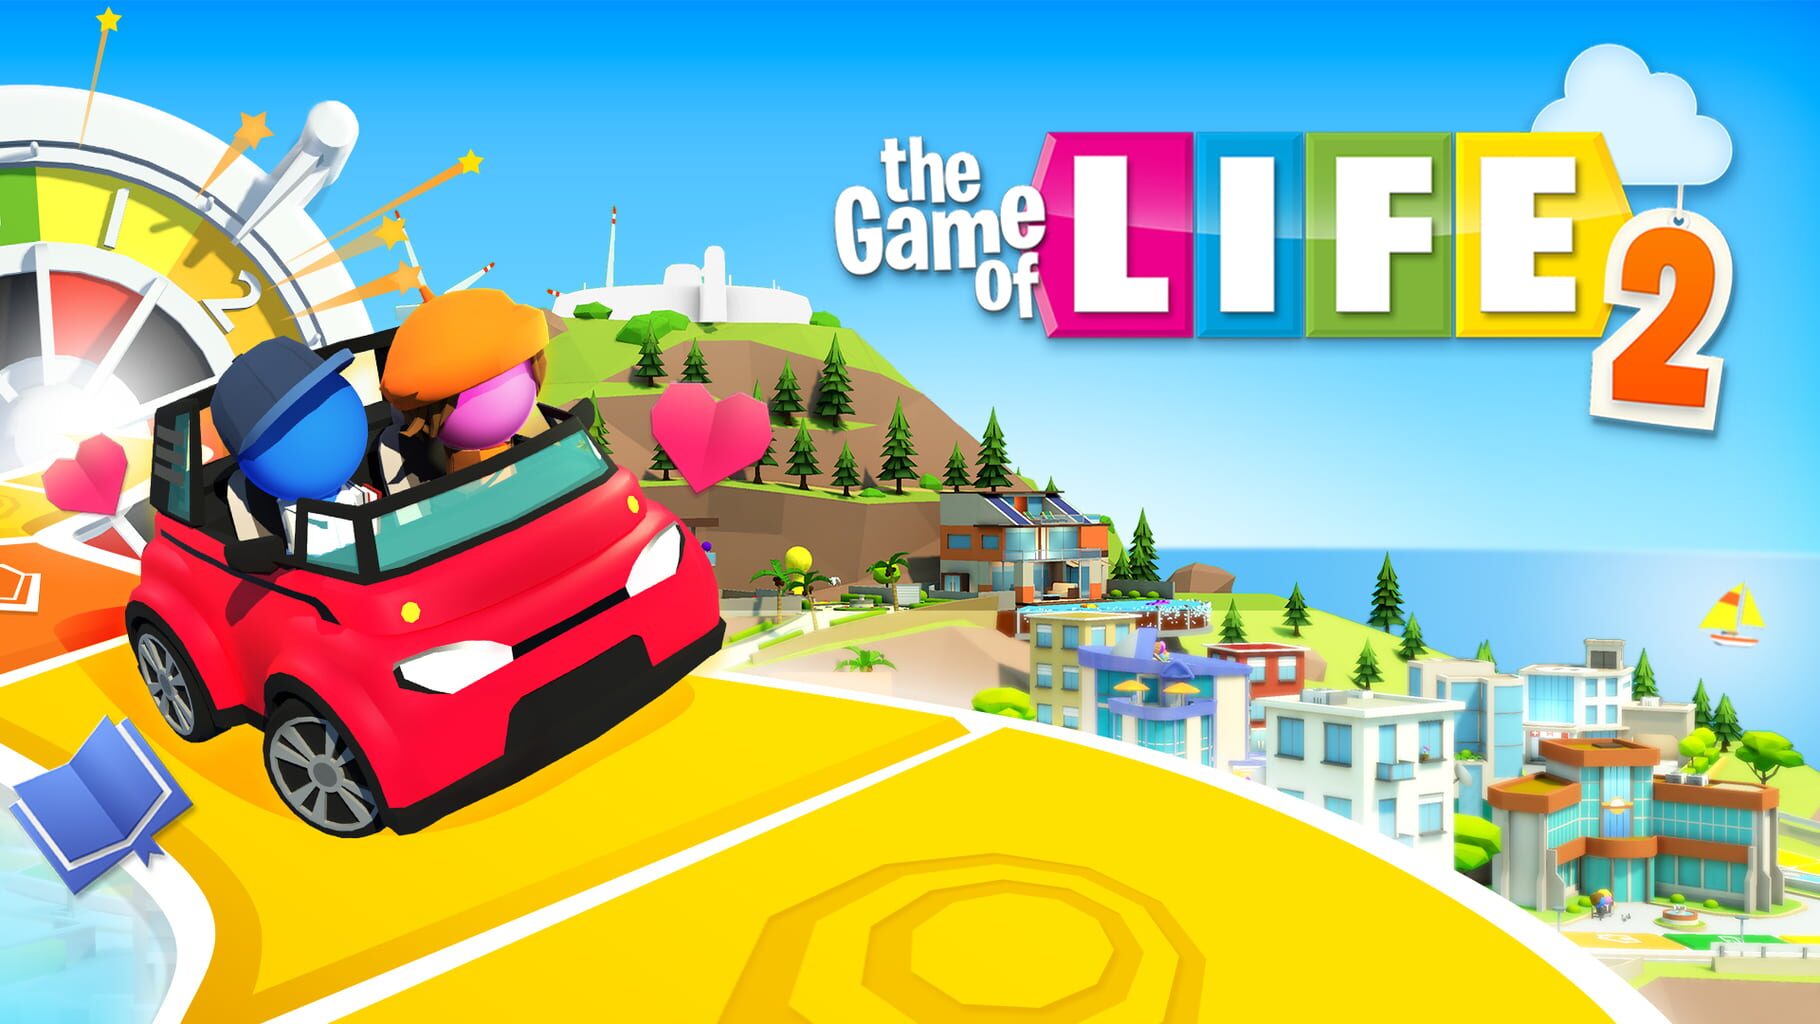 The Game of Life 2 artwork